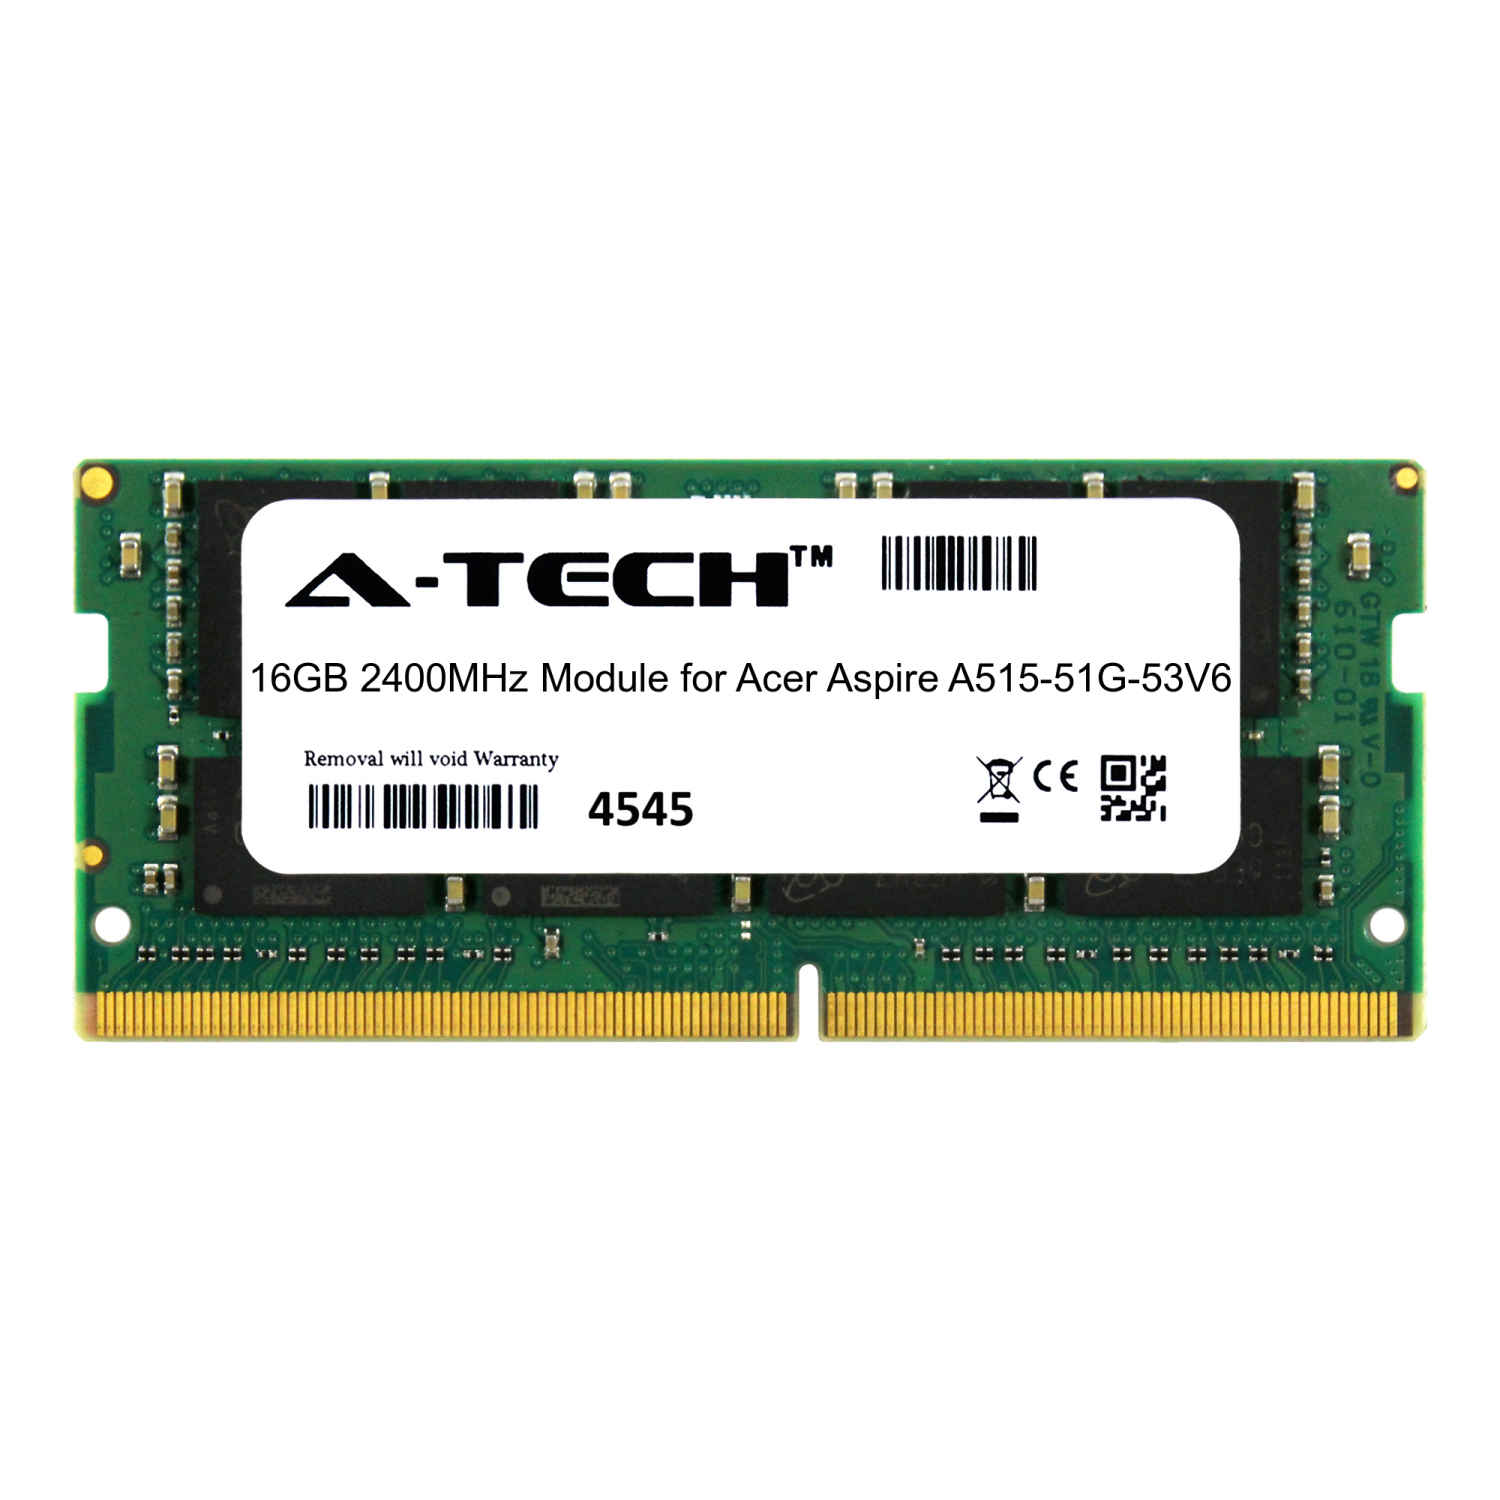 acer aspire one memory upgrade instructions